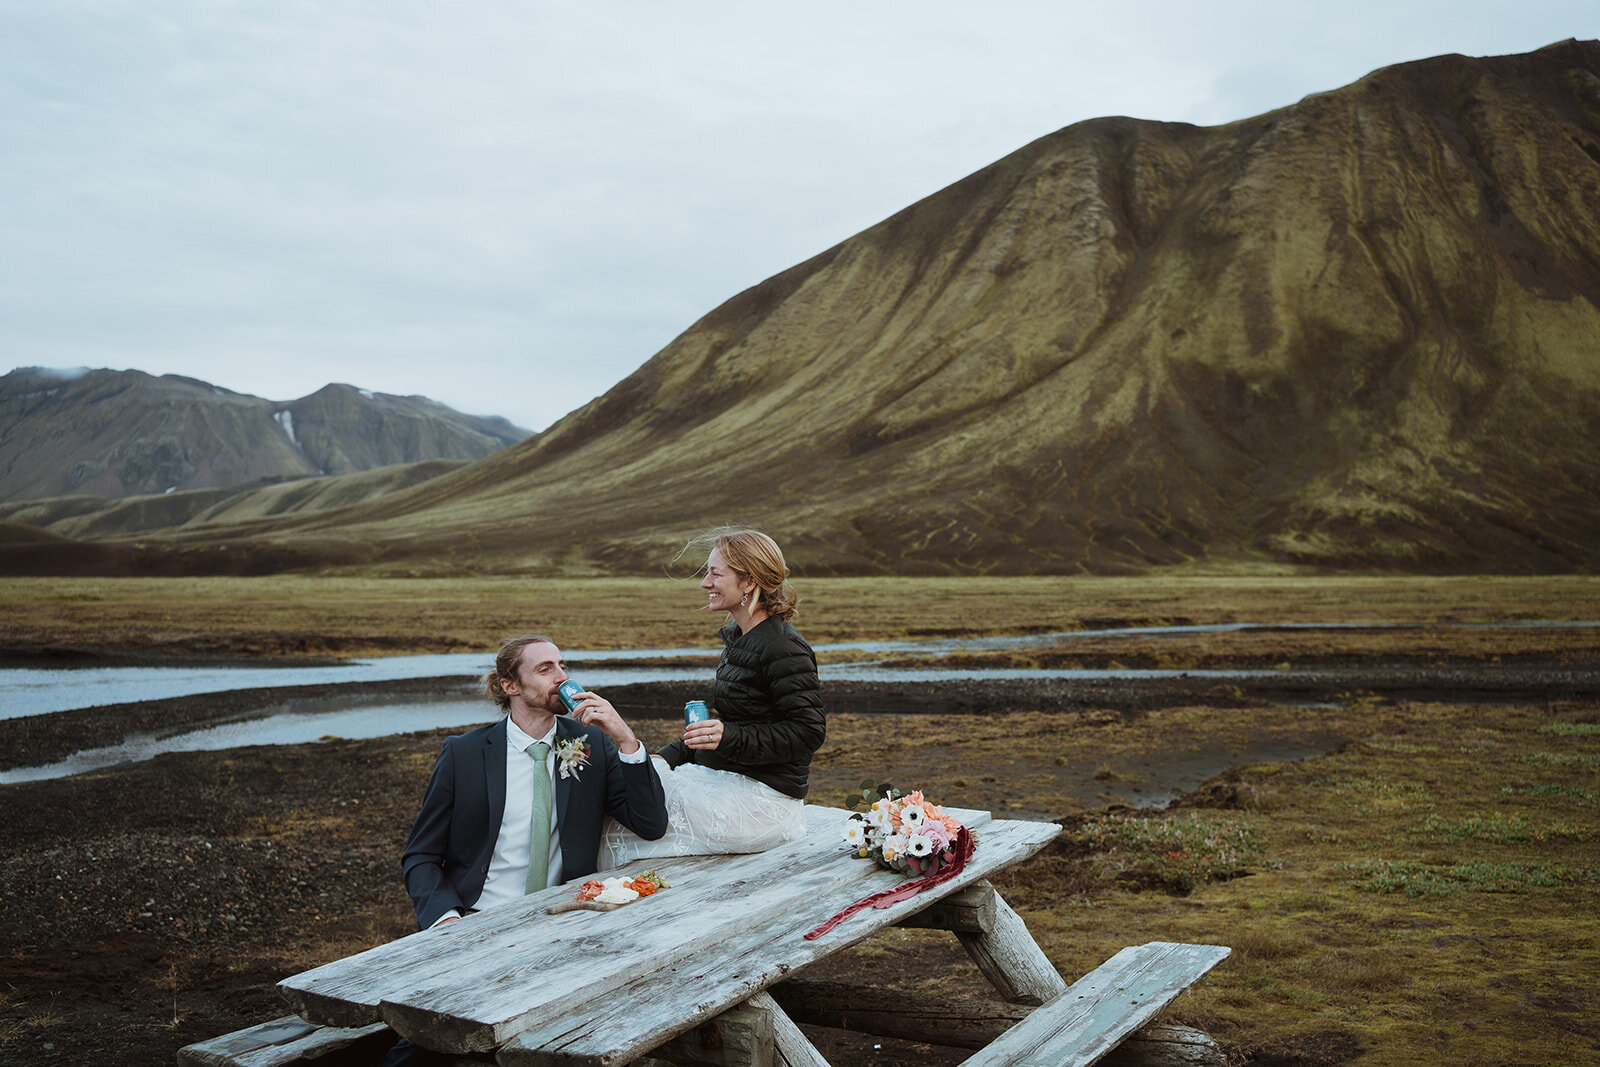 Rob & Jess had the most incredible adventure elopement in Iceland! Come and see iceland elopement northern lights, iceland wedding attire, iceland wedding photography and iceland wedding aesthetic. Book Sydney for your adventure elopement or romantic Iceland elopement